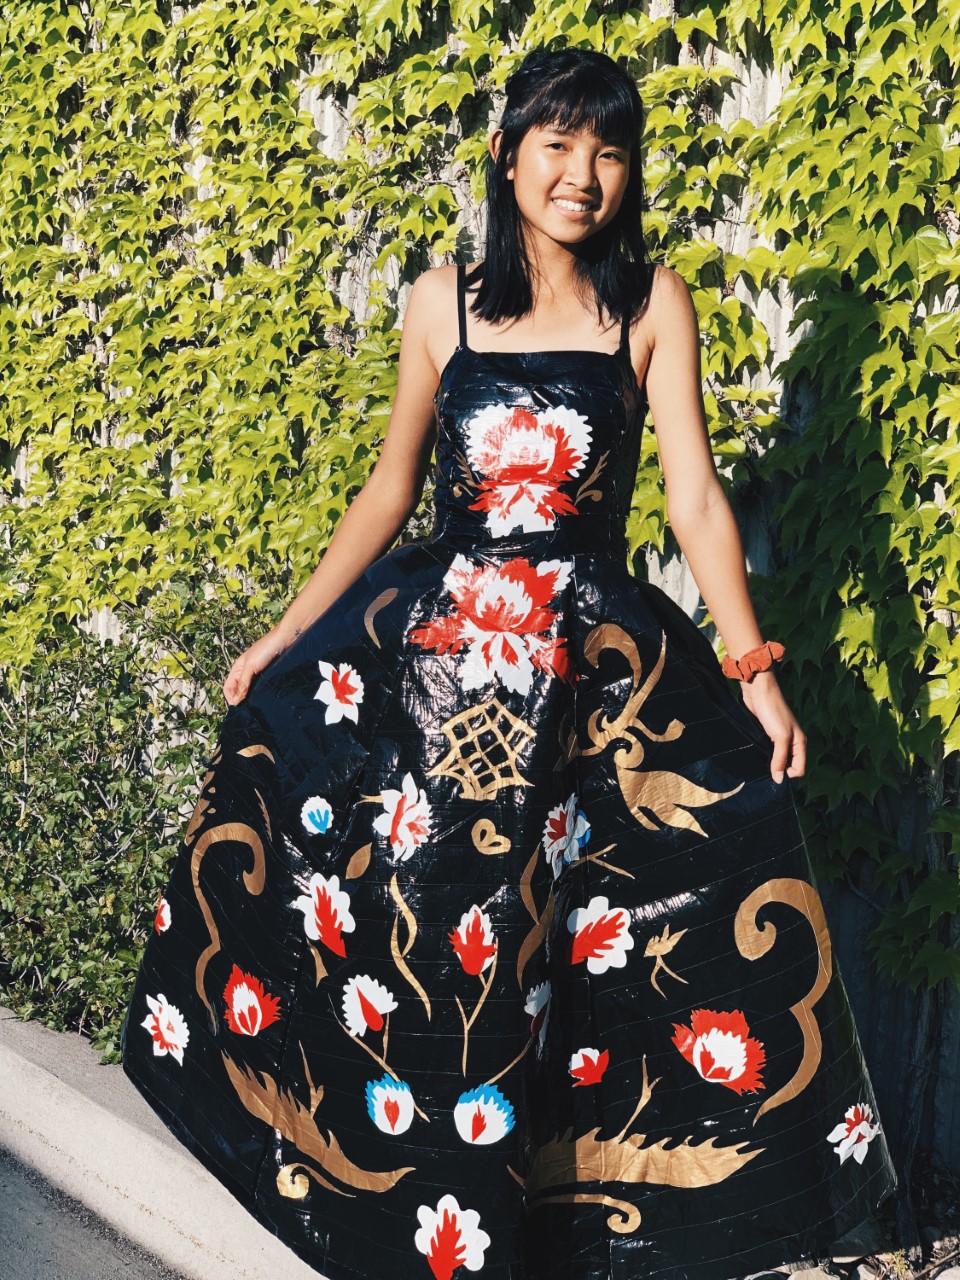 how to make a duct tape prom dress